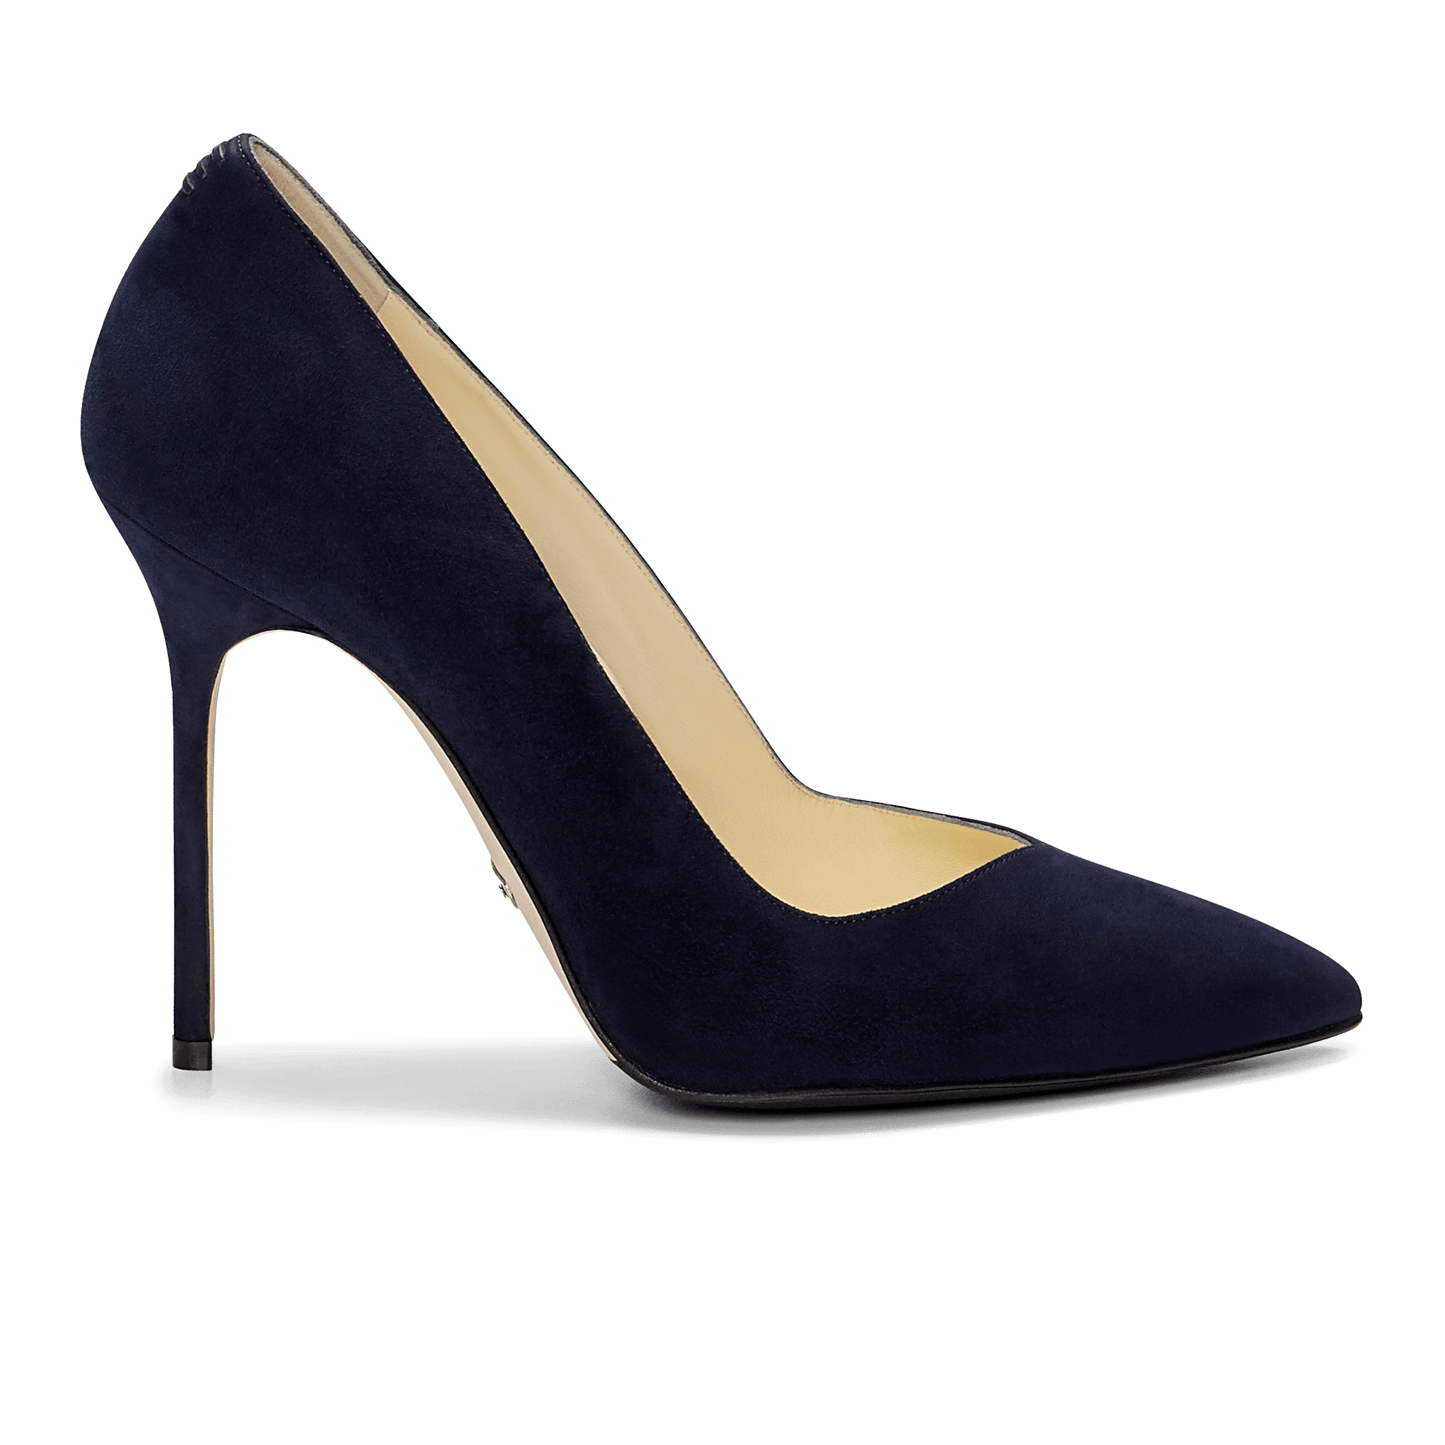 100m Italian Made Pointed Toe Pump in Navy Suede